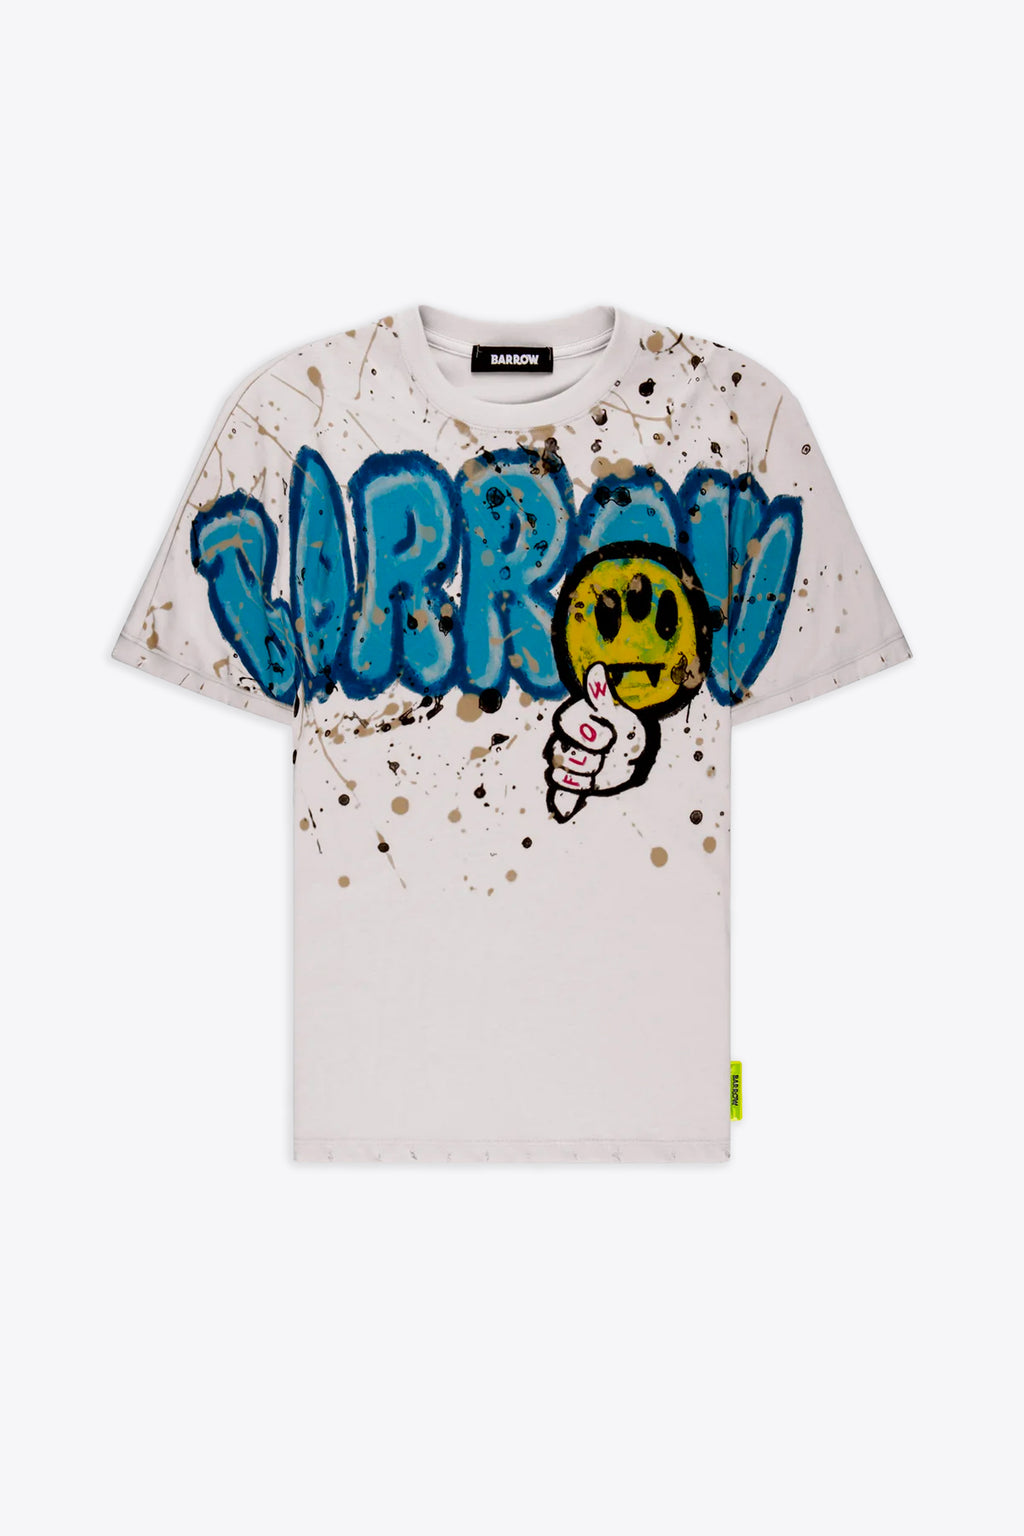 alt-image__Off-white-cotton-t-shirt-with-graffiti-logo-and-smile-print-